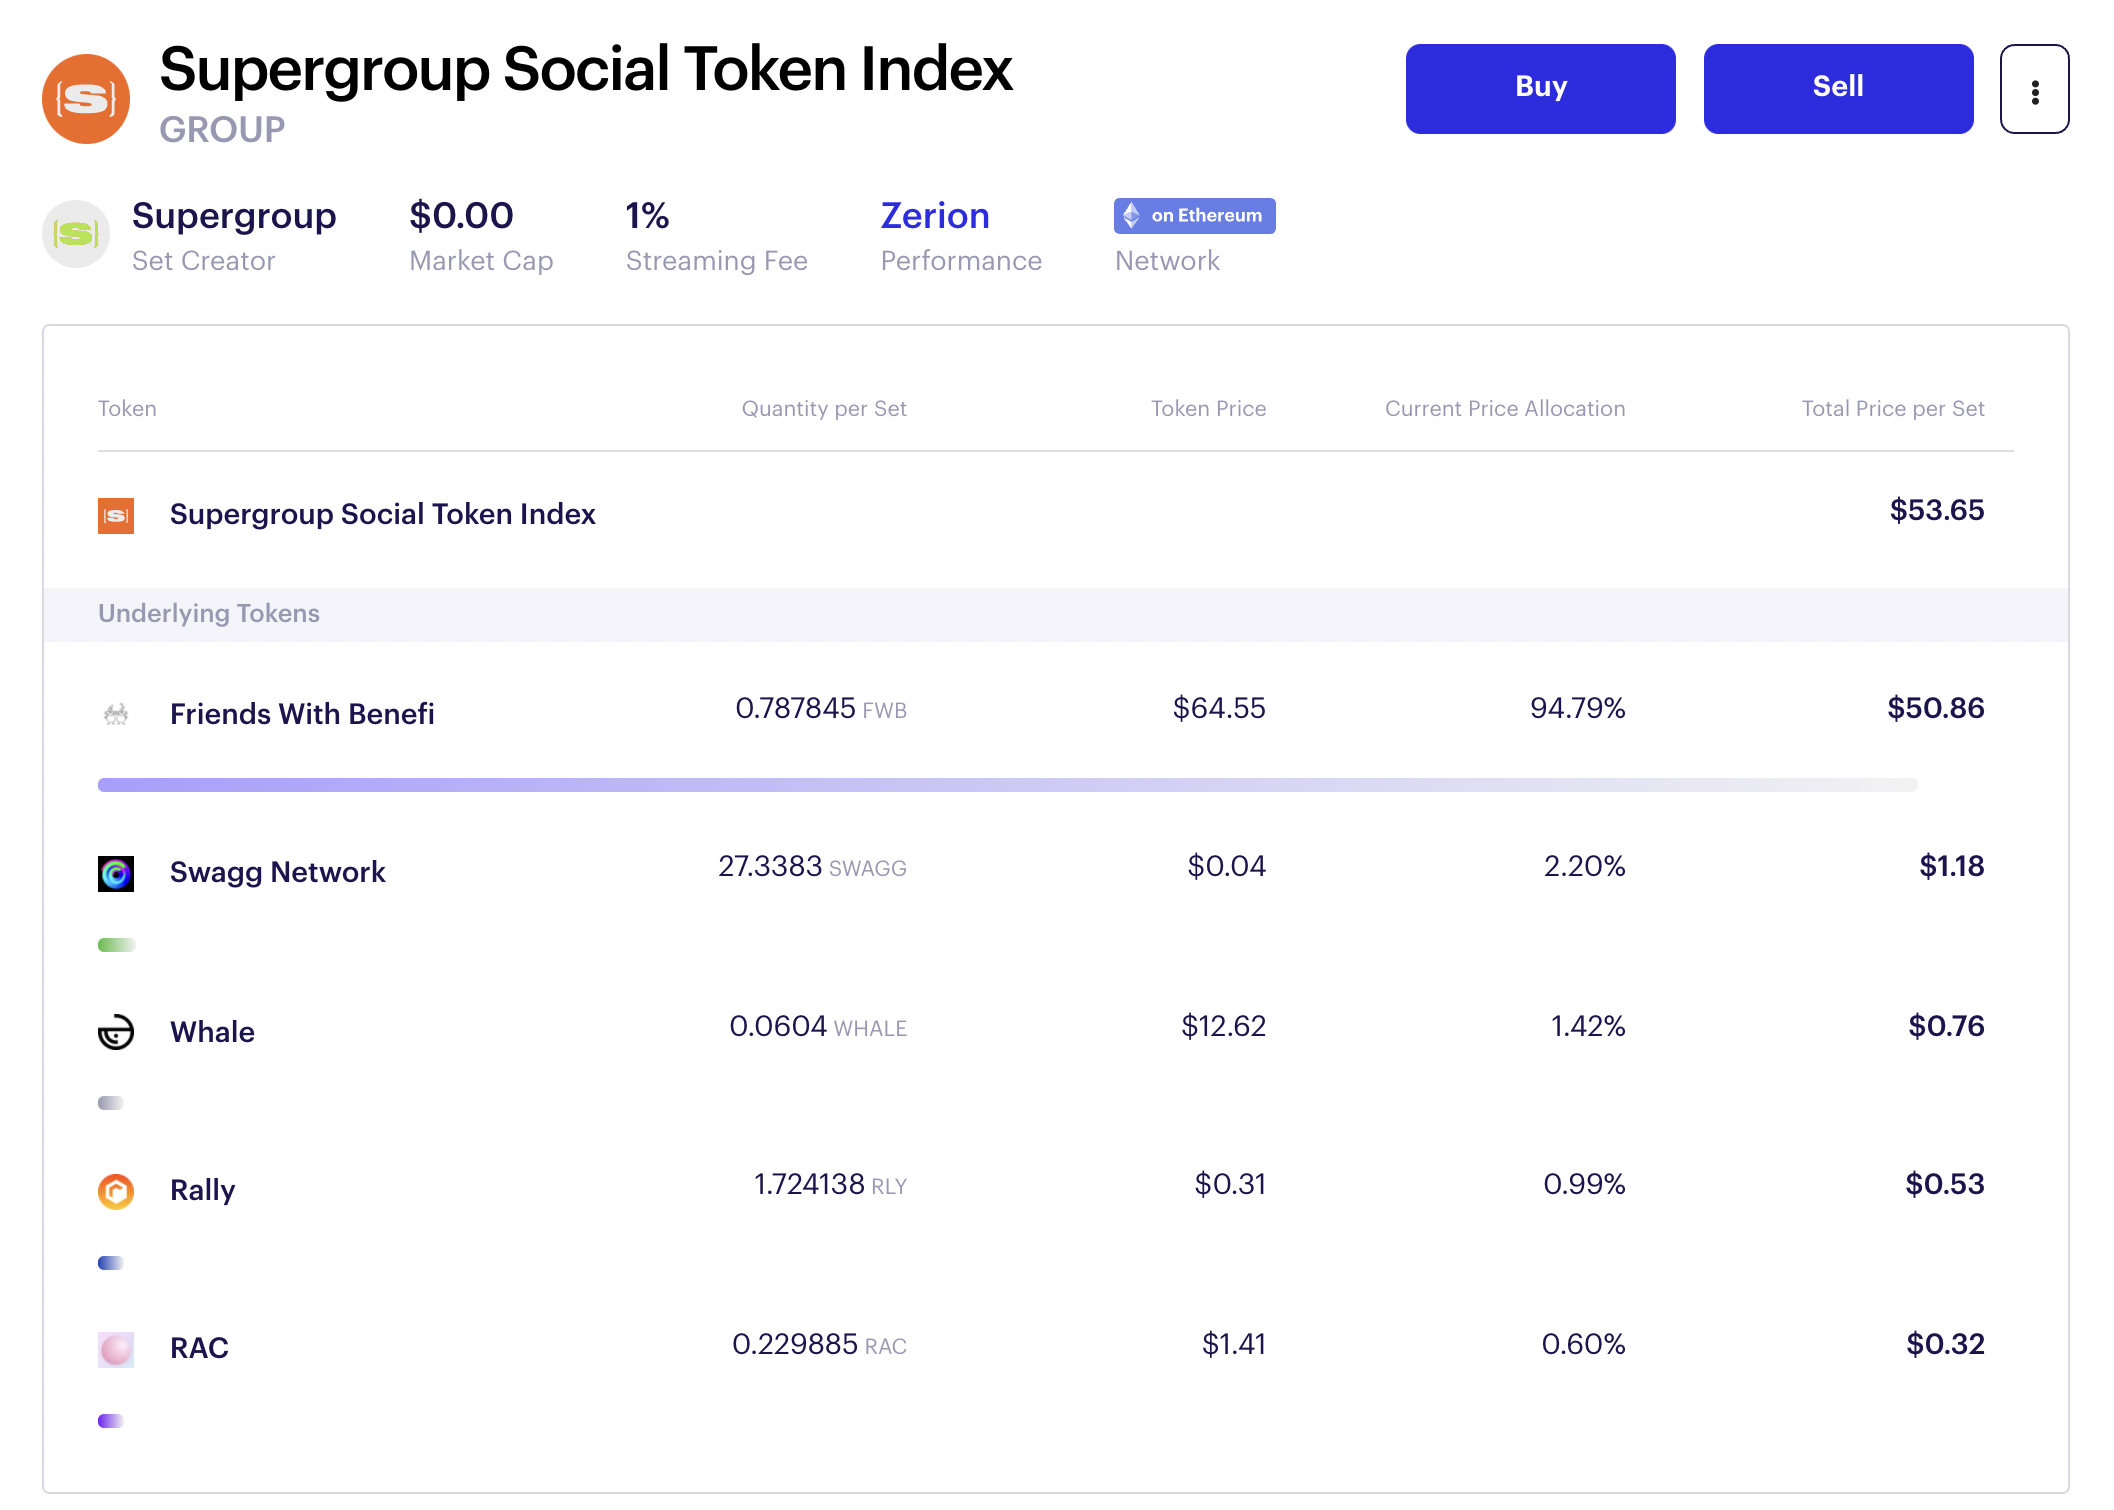 The Supergroup Social Token Index